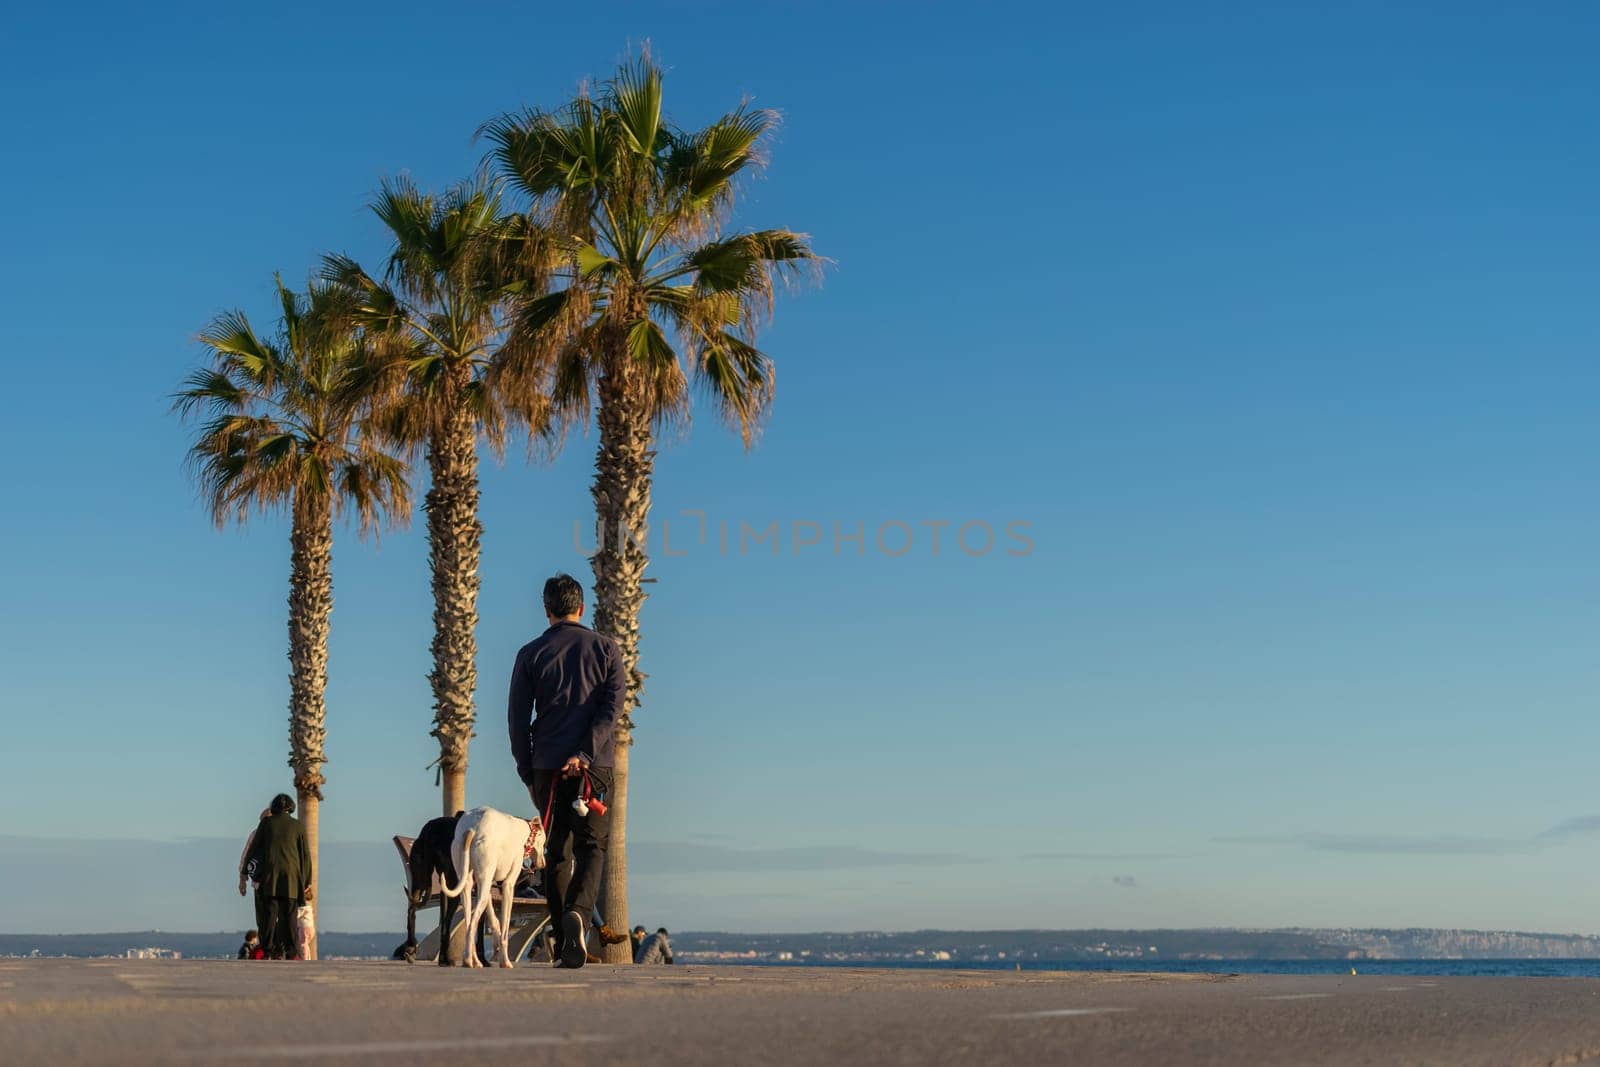 Seaside Stroll with Companions and Palms by Juanjo39